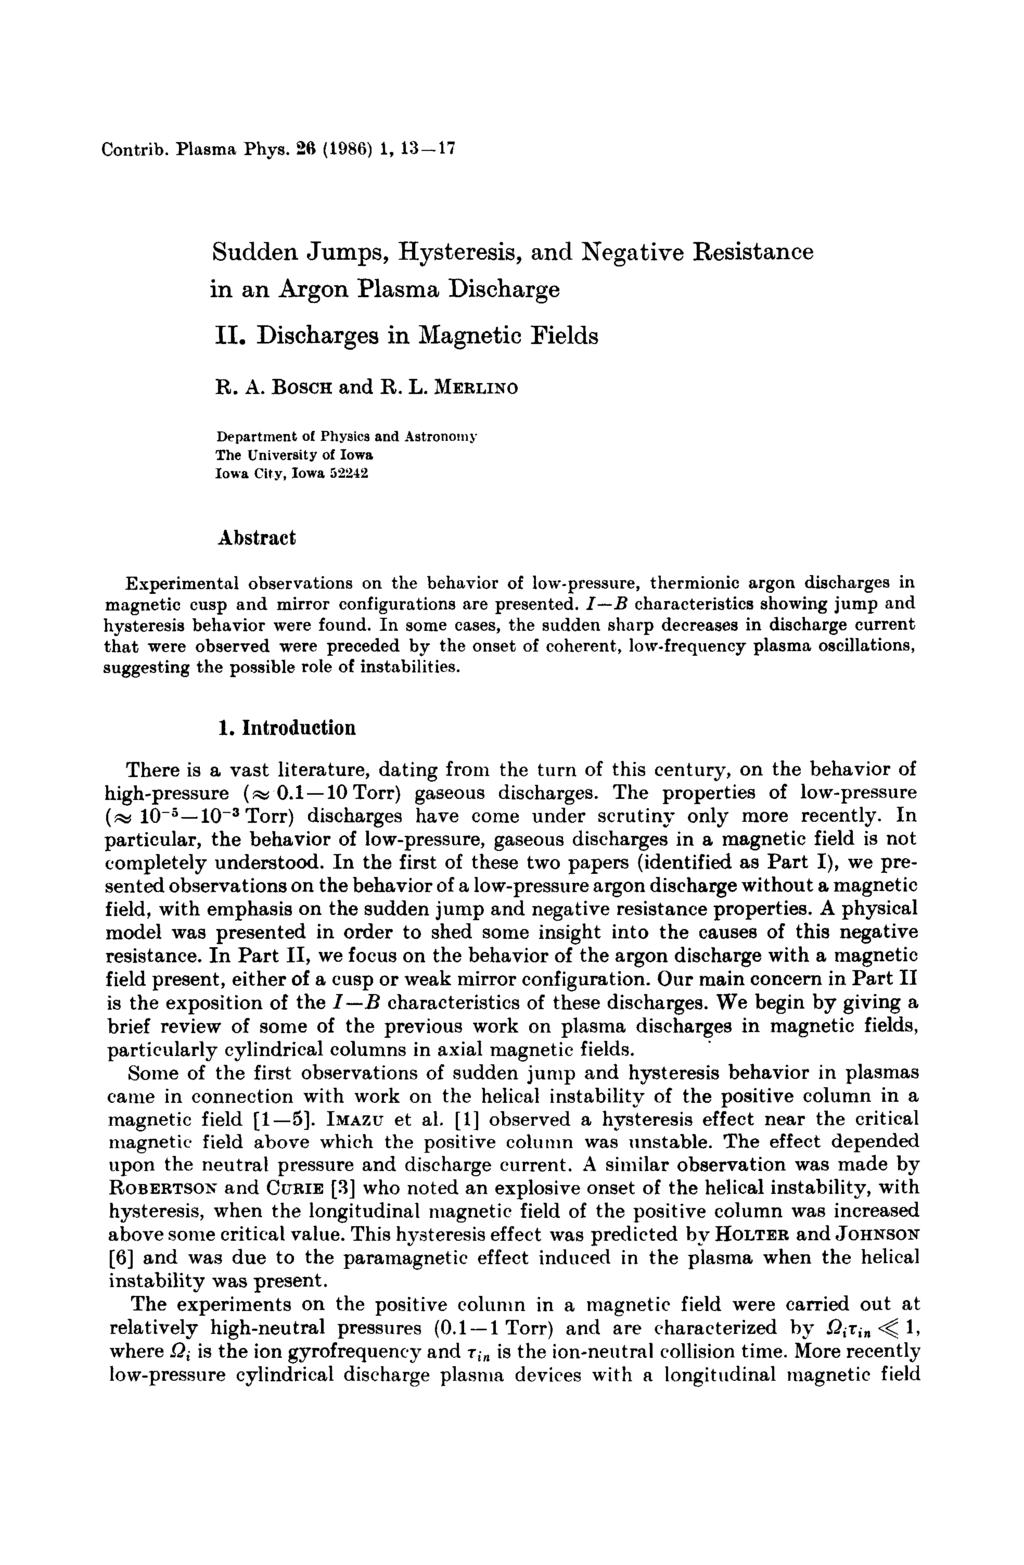 Contrib. Plasma Phys. 26 (1986) 1, 13-17 Sudden Jumps, Hysteresis, and Negative Resistance in an Argon Plasma Discharge 11. Discharges in Magnetic Fields R. A. BOSCR and R. L.